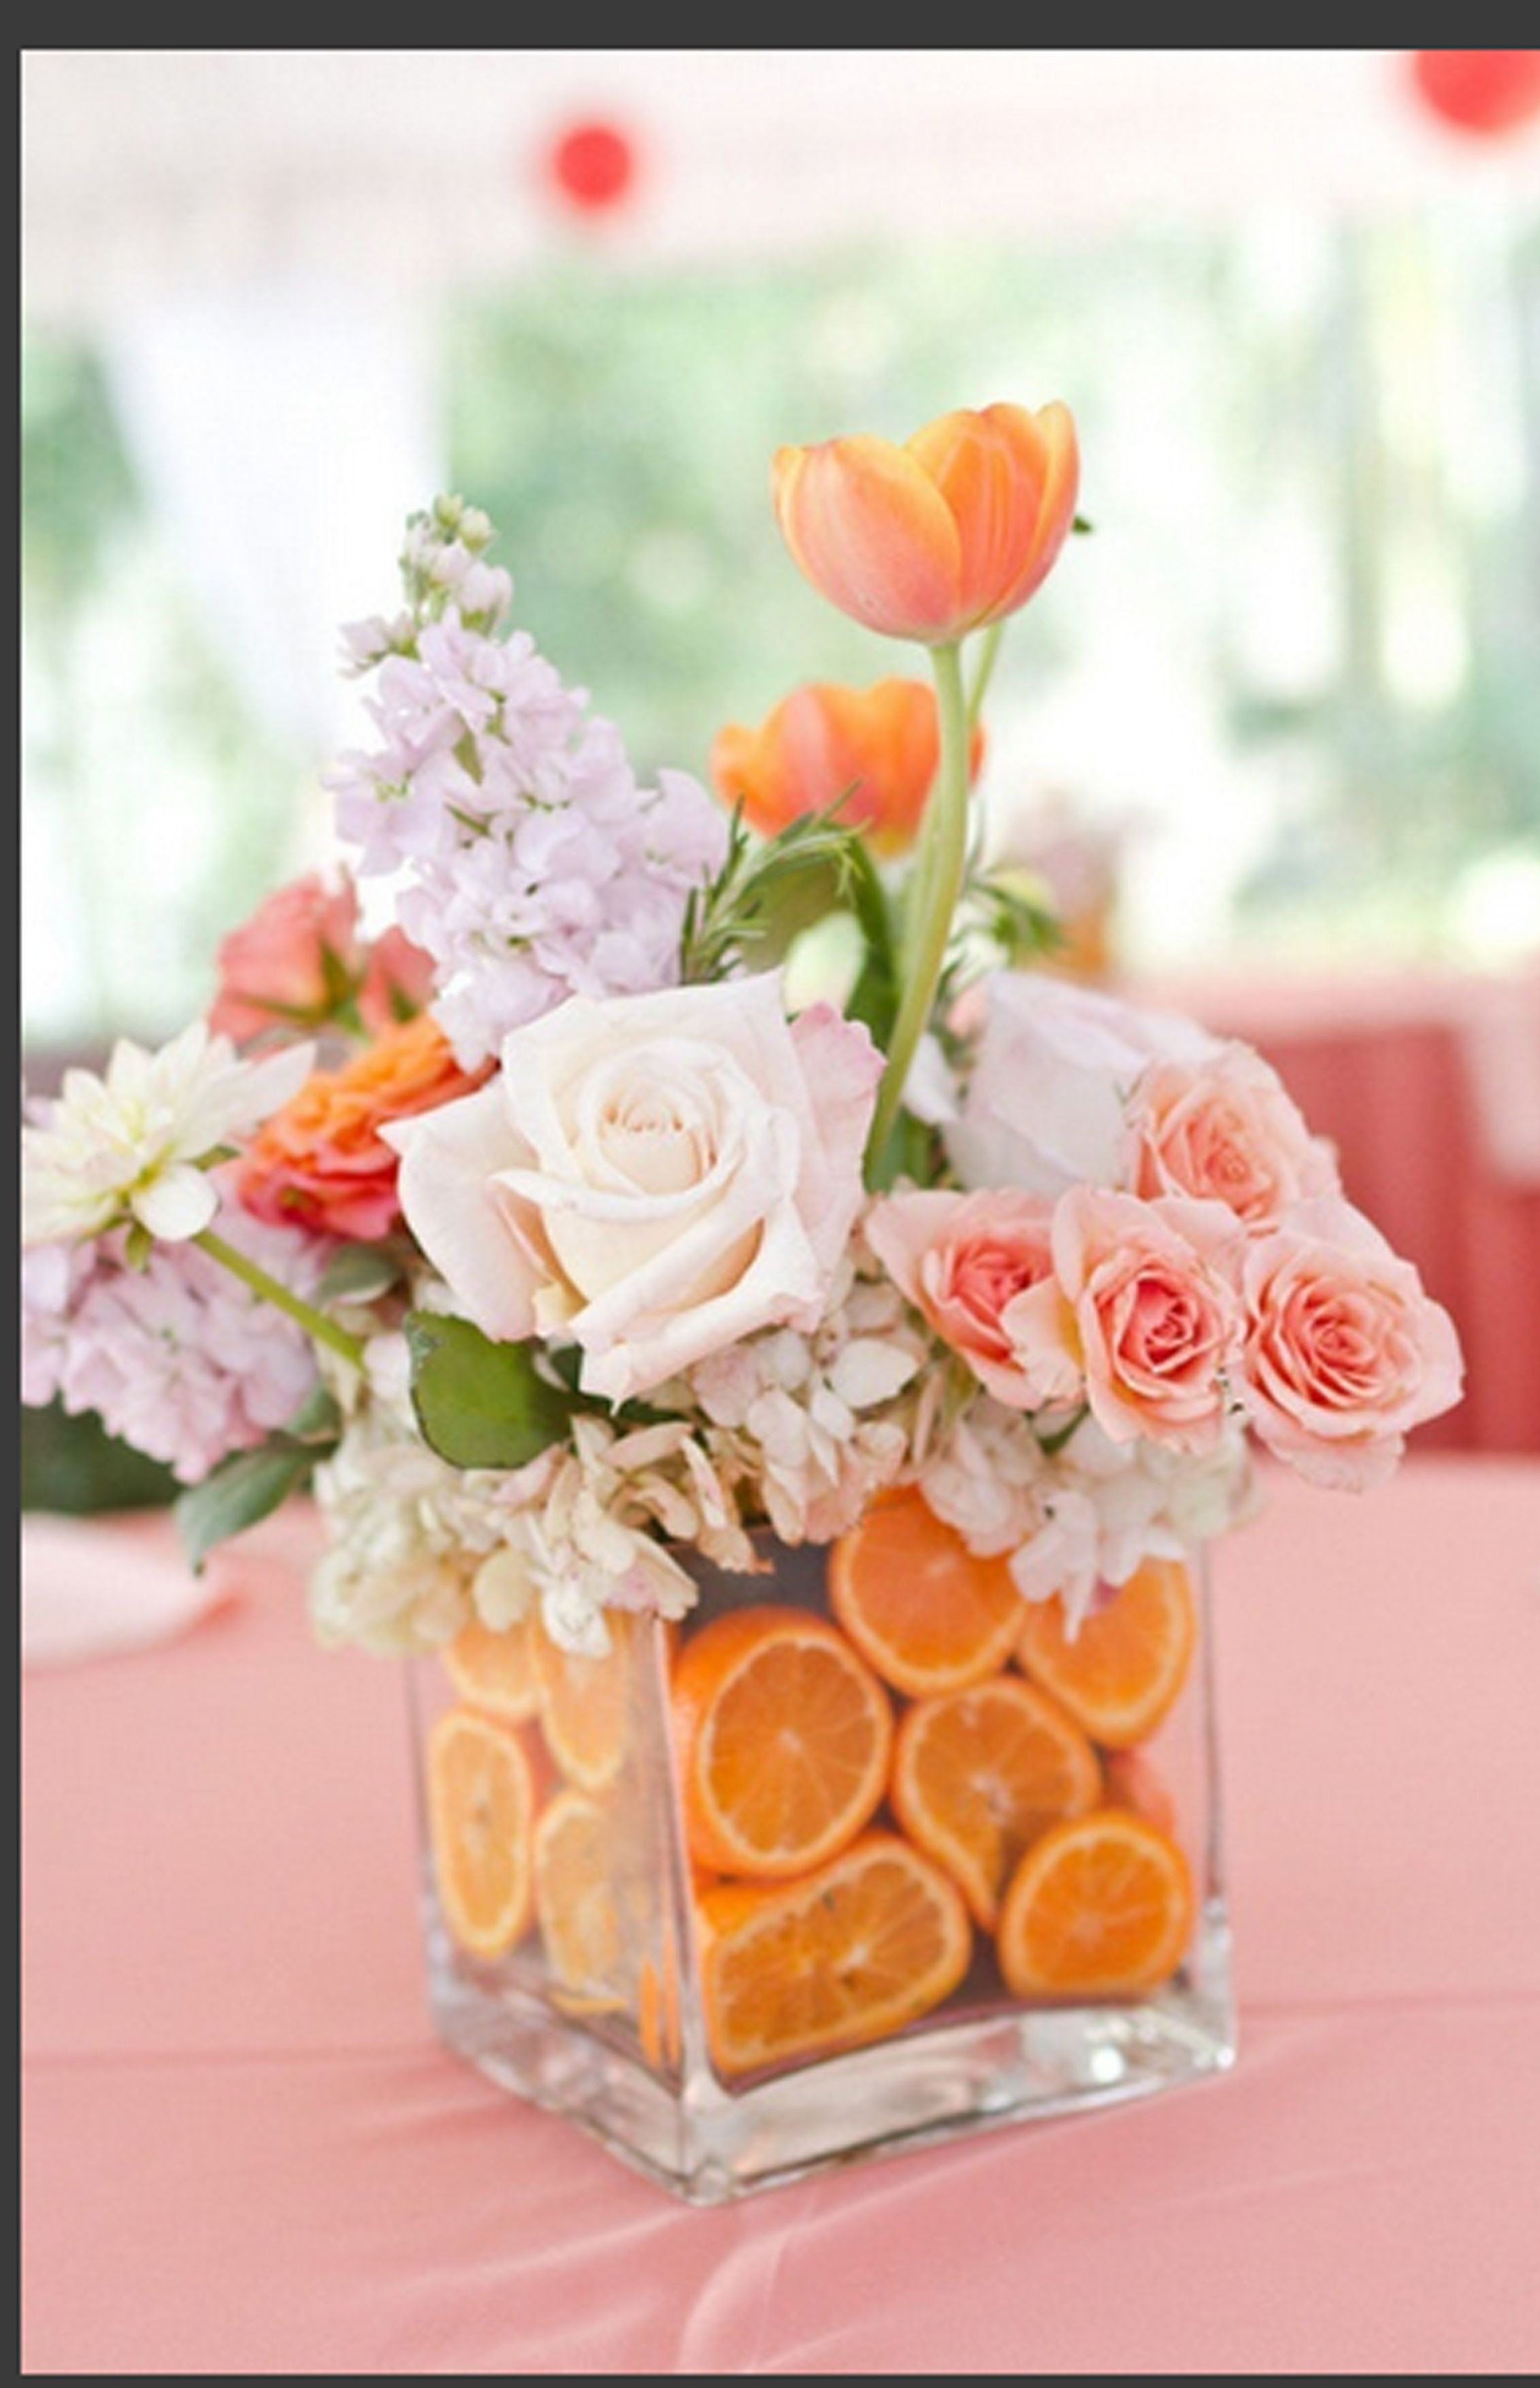 10 Wonderful Tulip Vase Ideas 2024 free download tulip vase ideas of orange wedding blommor pinterest flower arrangements flowers pertaining to since the traditional wedding anniversary gift is fruit and flowers wouldnt this be great or ma